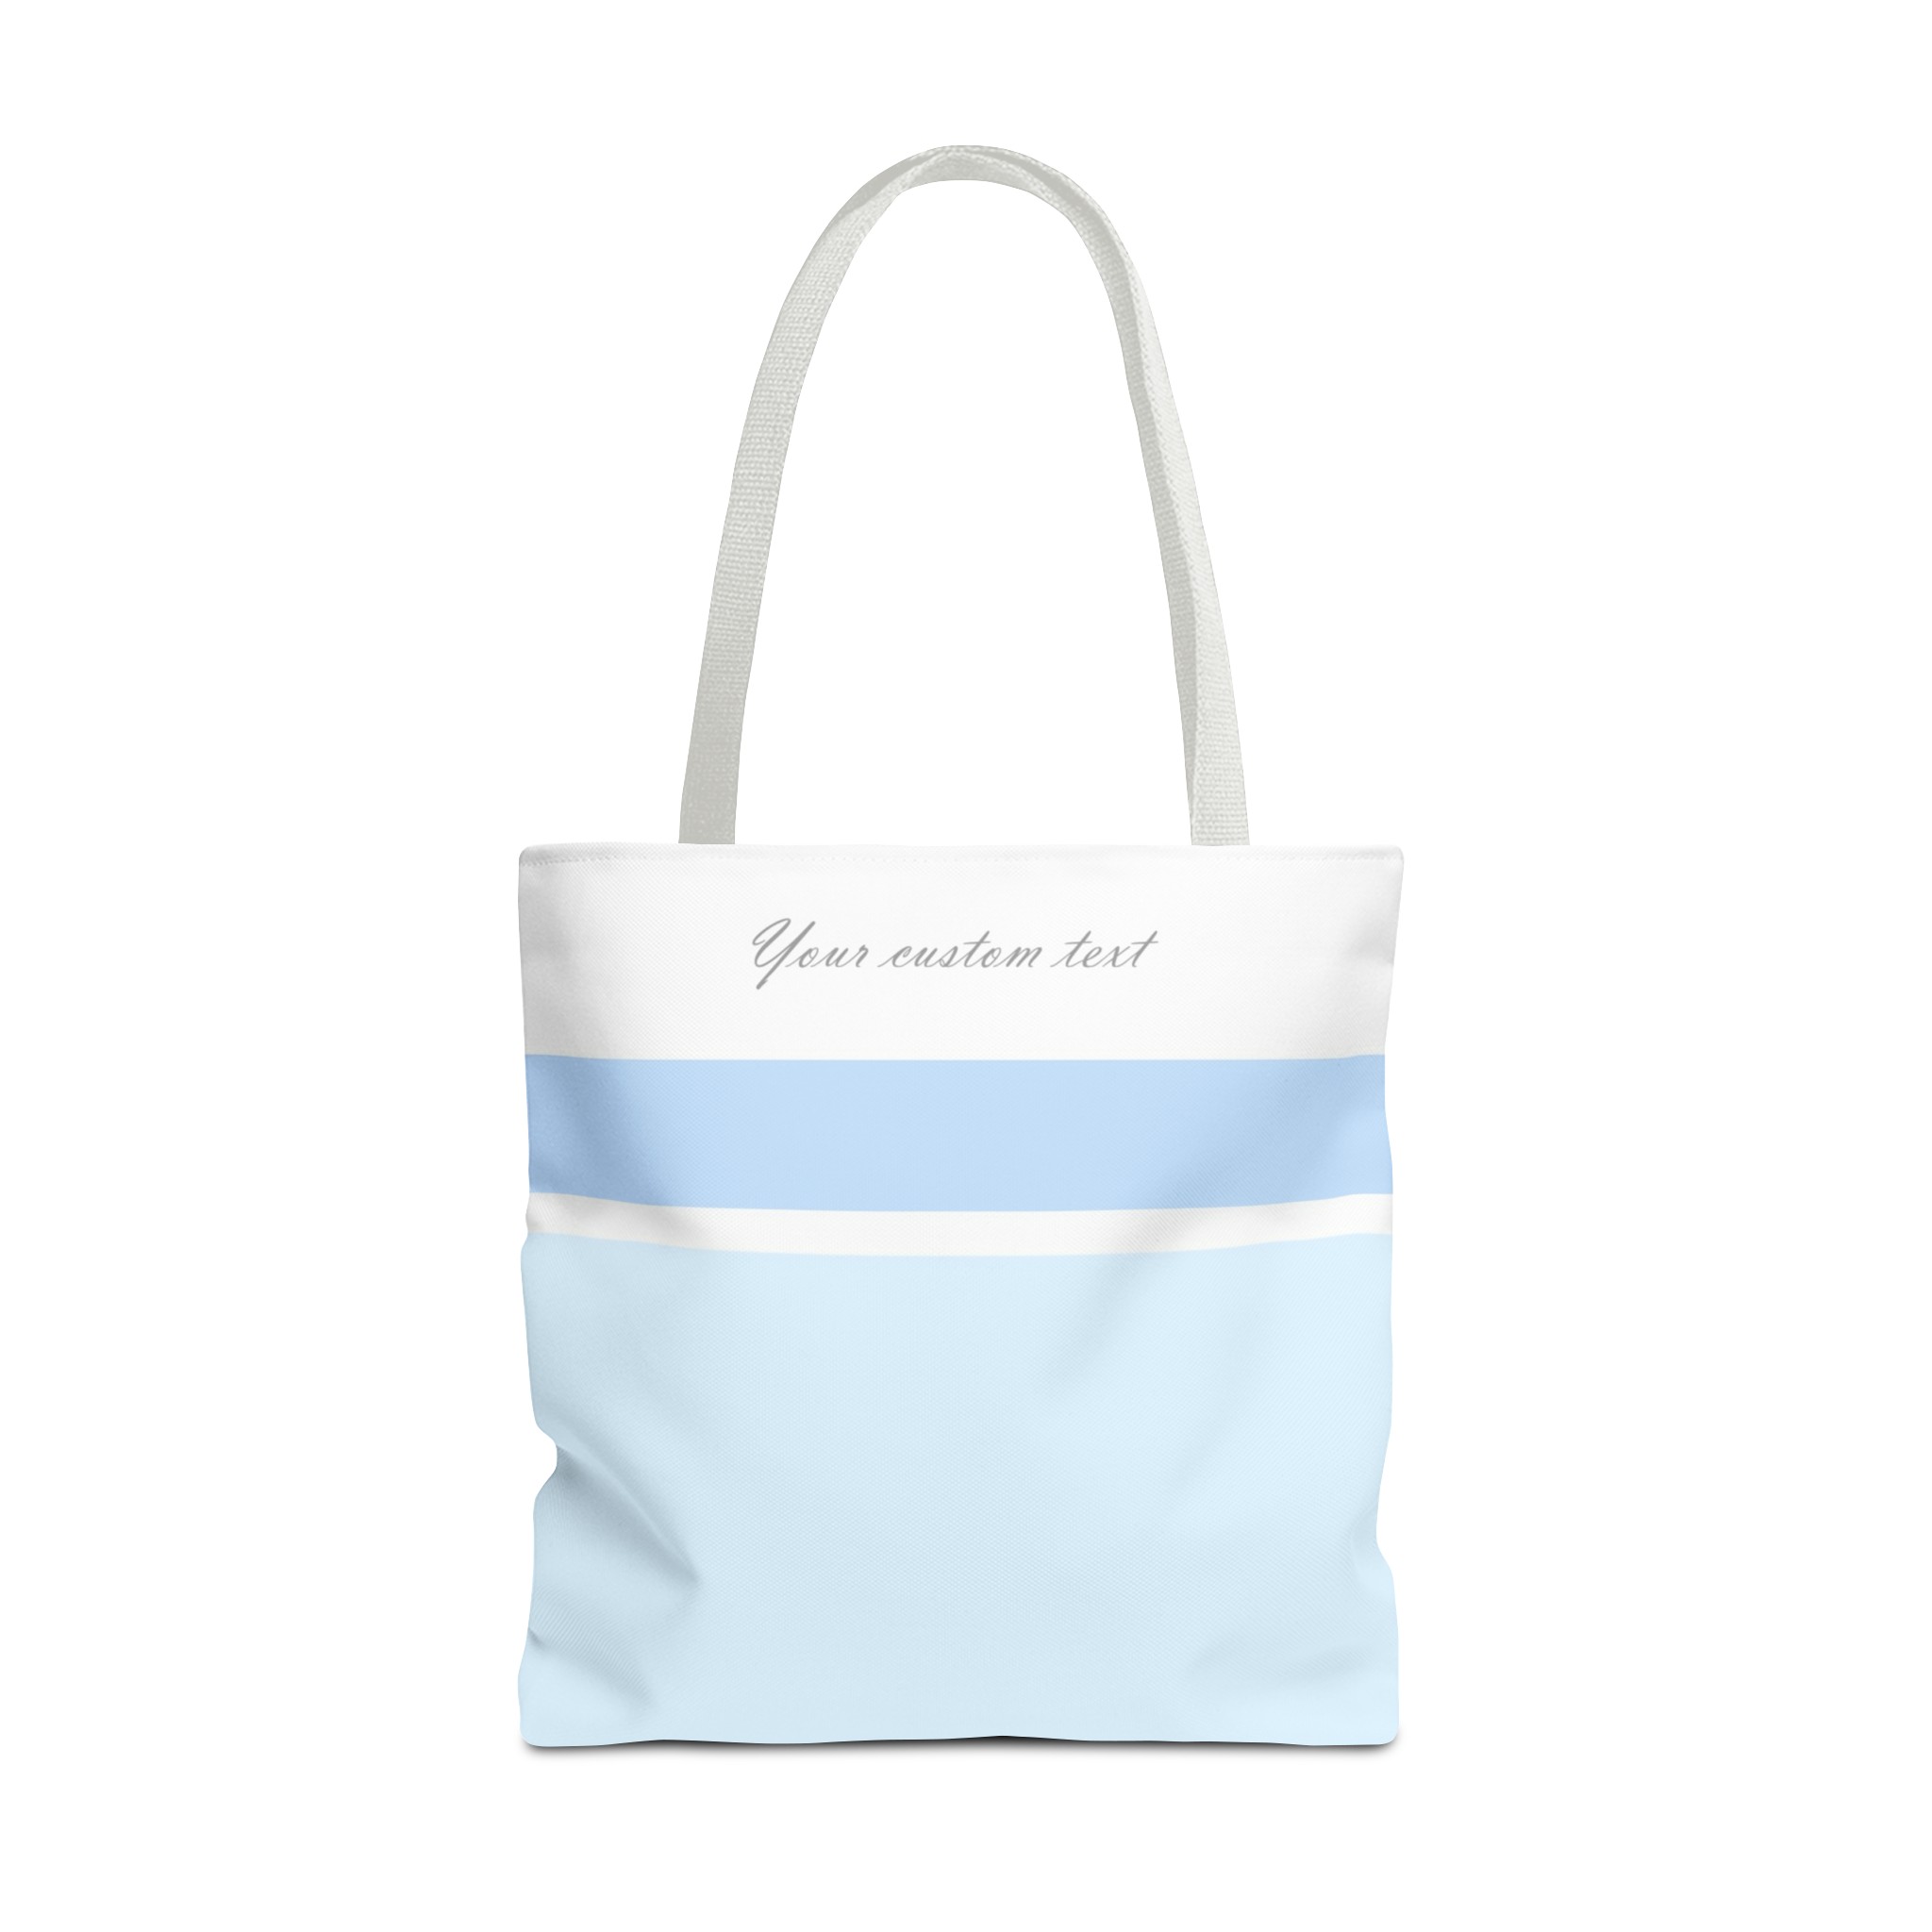 light blue and white tote bag with your custom personalized text. white handles